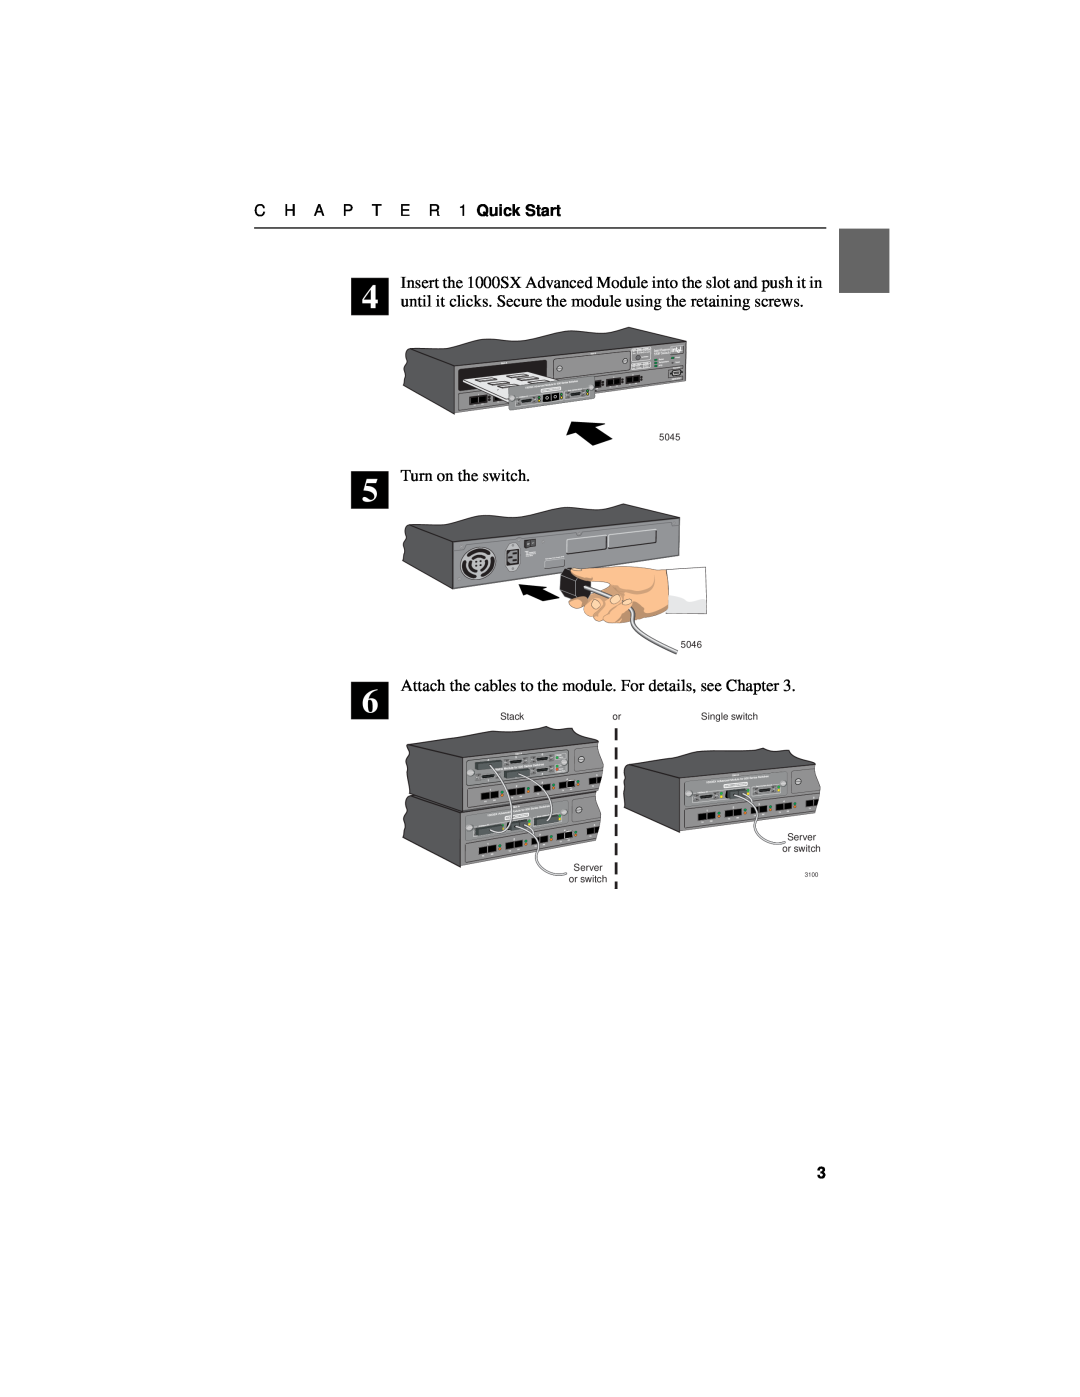 Intel 1000SX manual C H A P T E R 1 Quick Start, 5045, 5046, Stack, Server, or switch, Single switch, 3100 